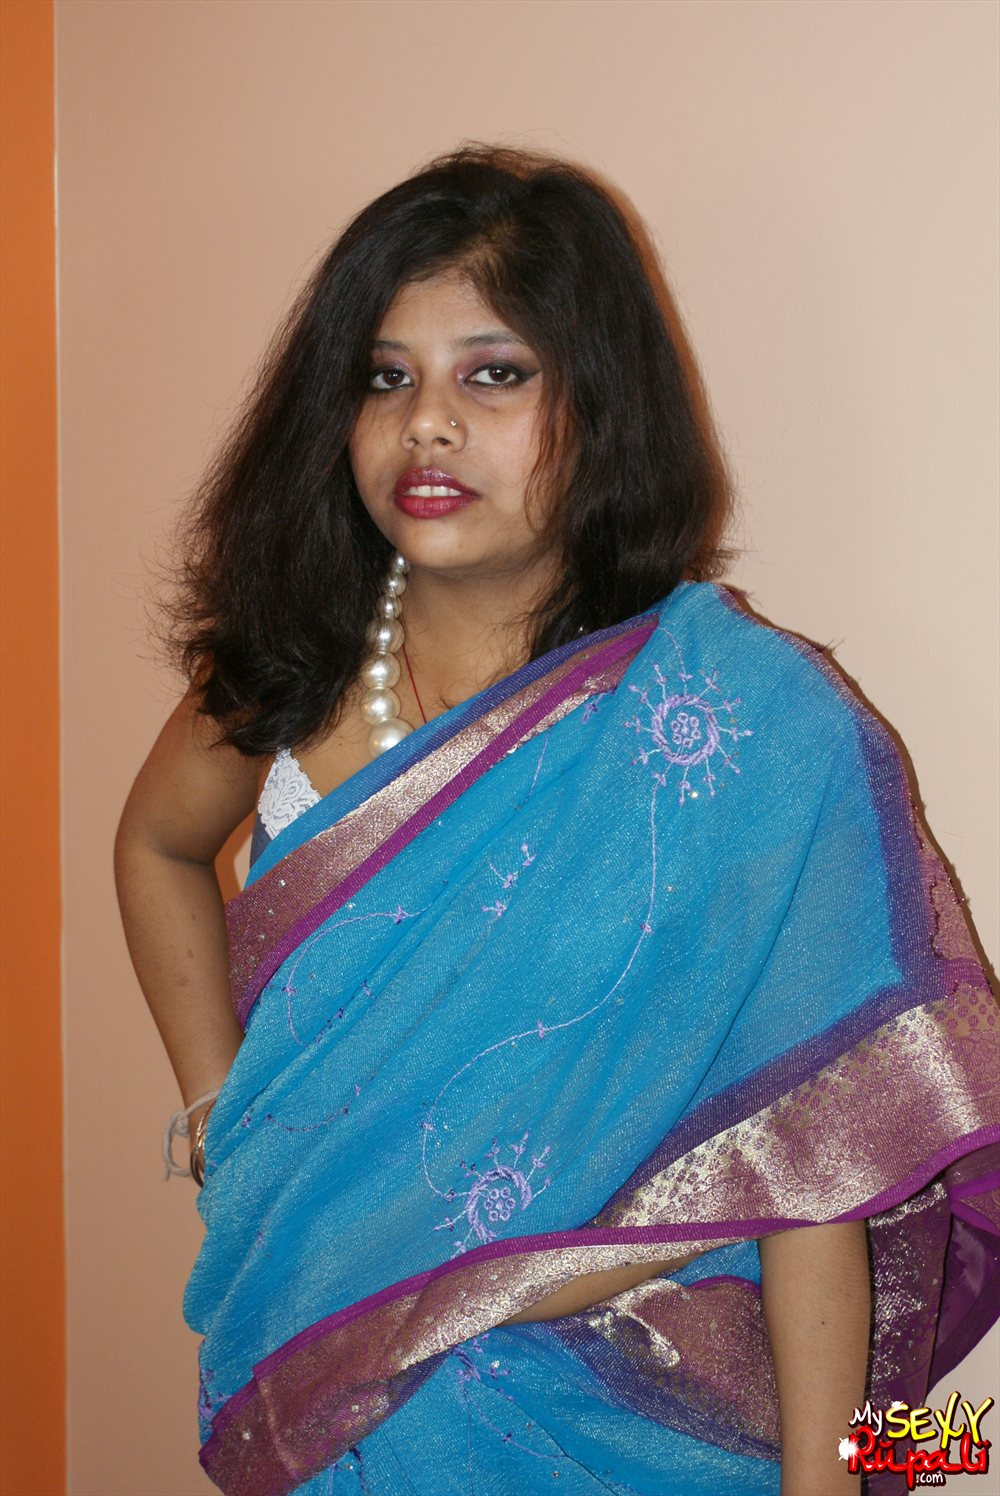 Pic gal1 Rupali in indian saree stripping naked. 